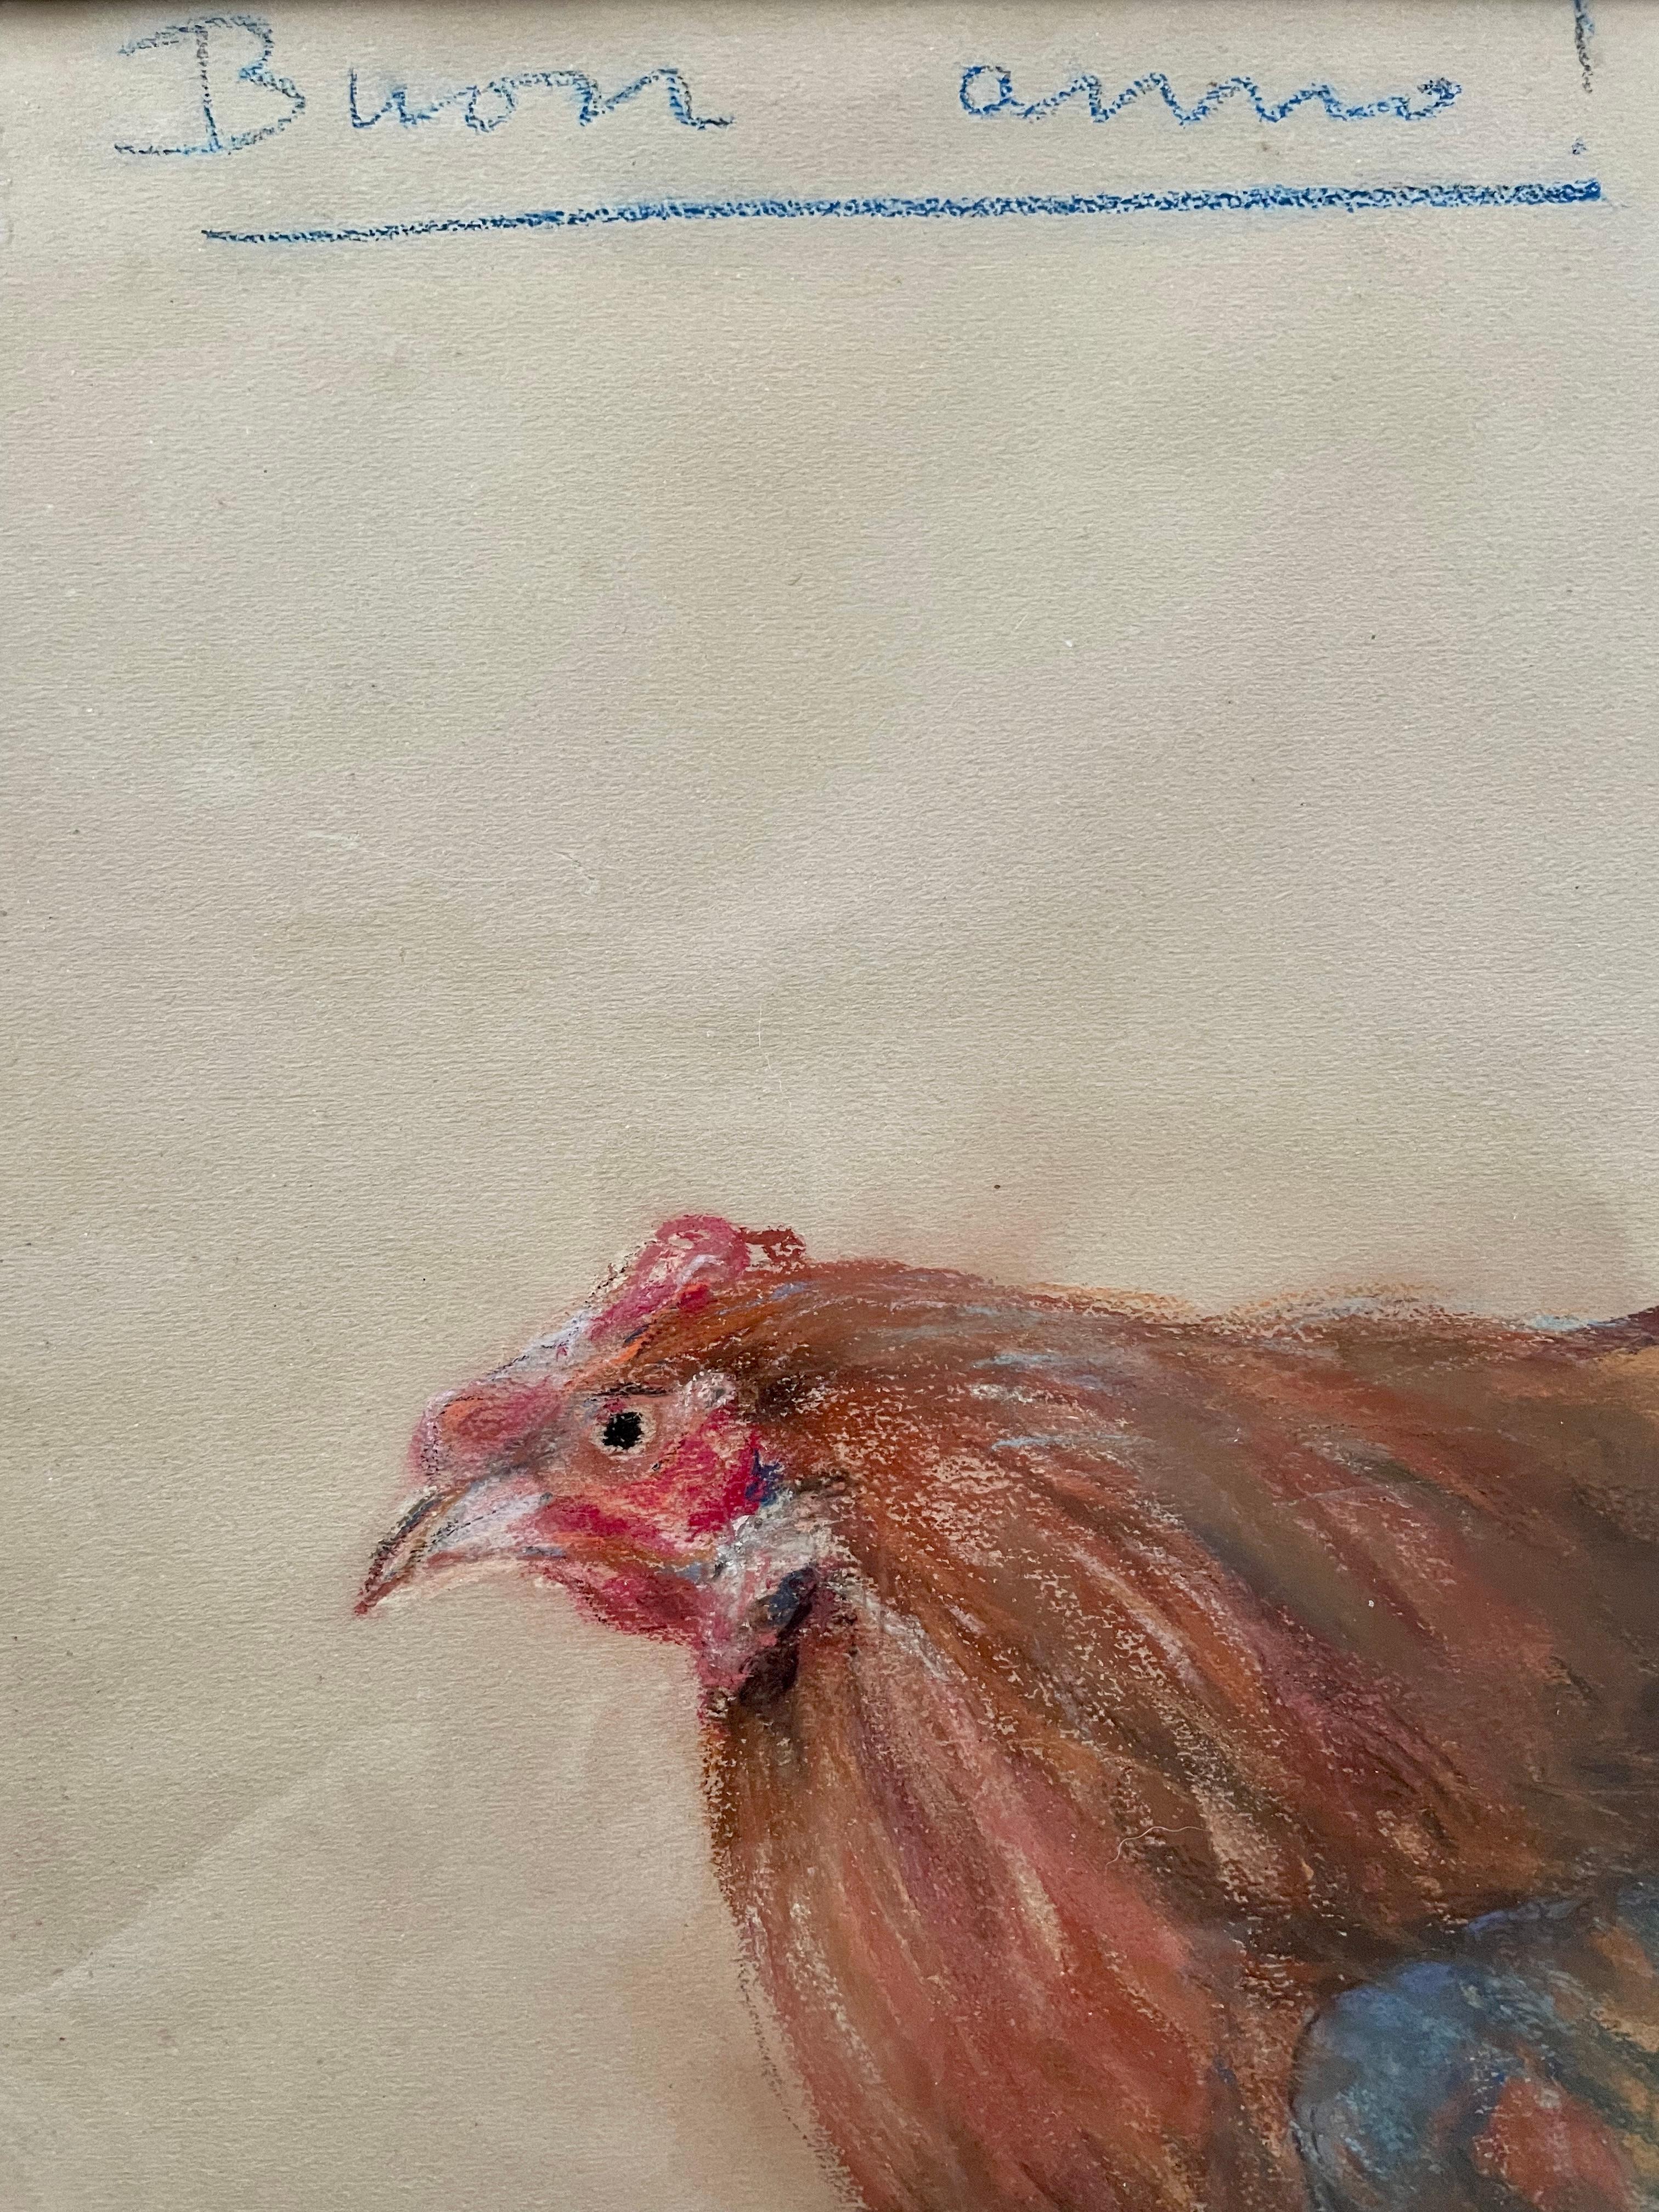 Buon Anno New Year Rooster.  Vintage Italian rooster in colourful pastels on paper in original thin white painted frame. Italy, mid-20th century

Dimensions: 27.5